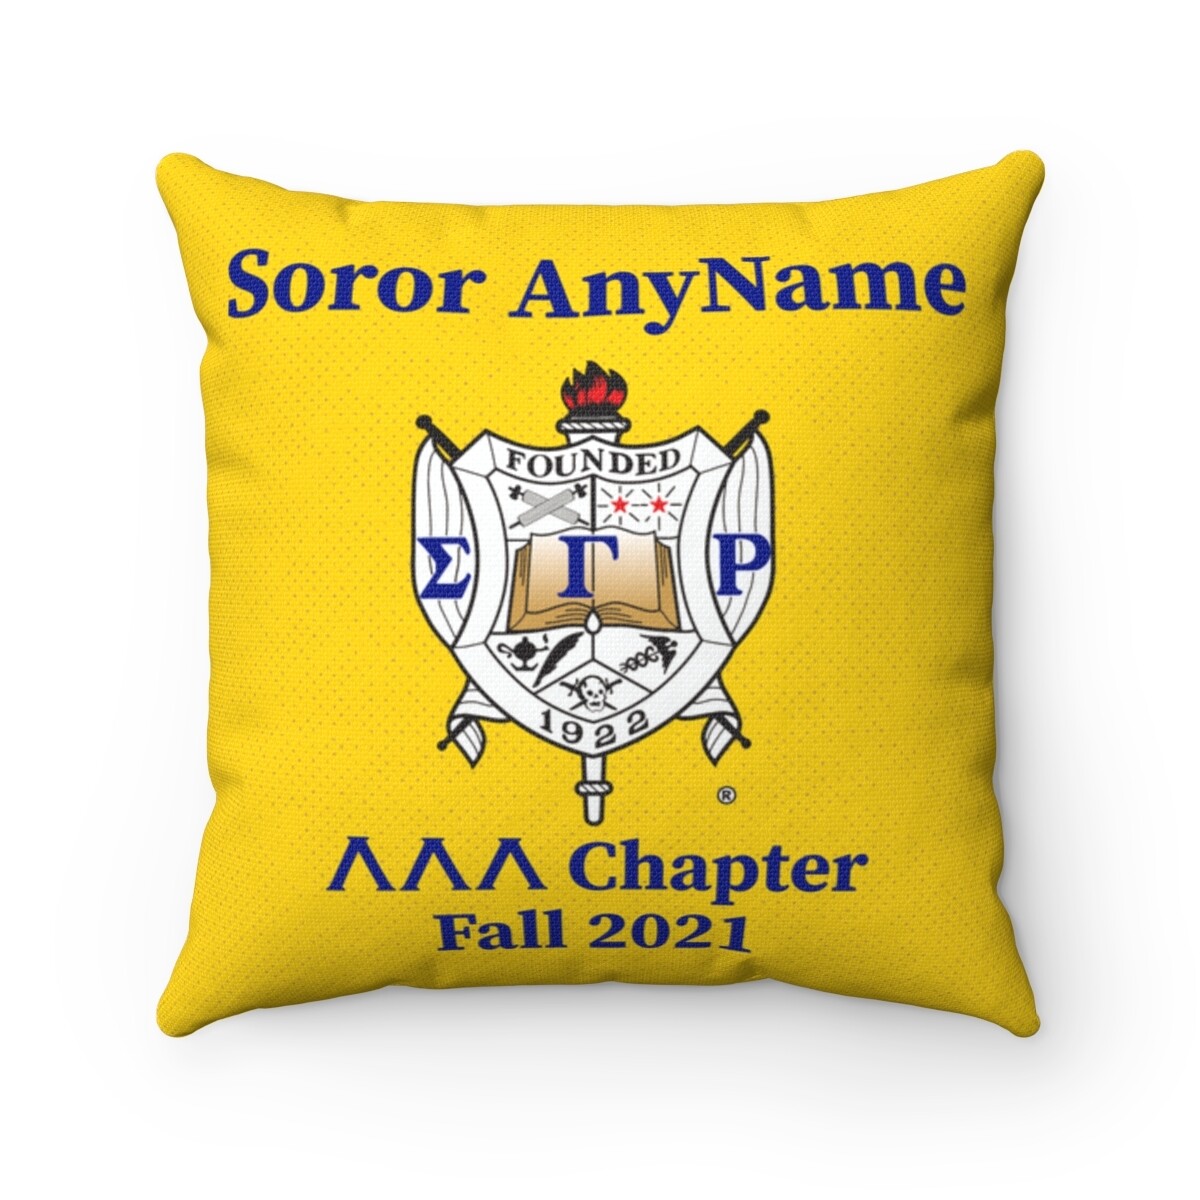 Sigma Gamma Rho -Personalized Burlap Pillow - 18x18" - SPECIAL PURCHASE